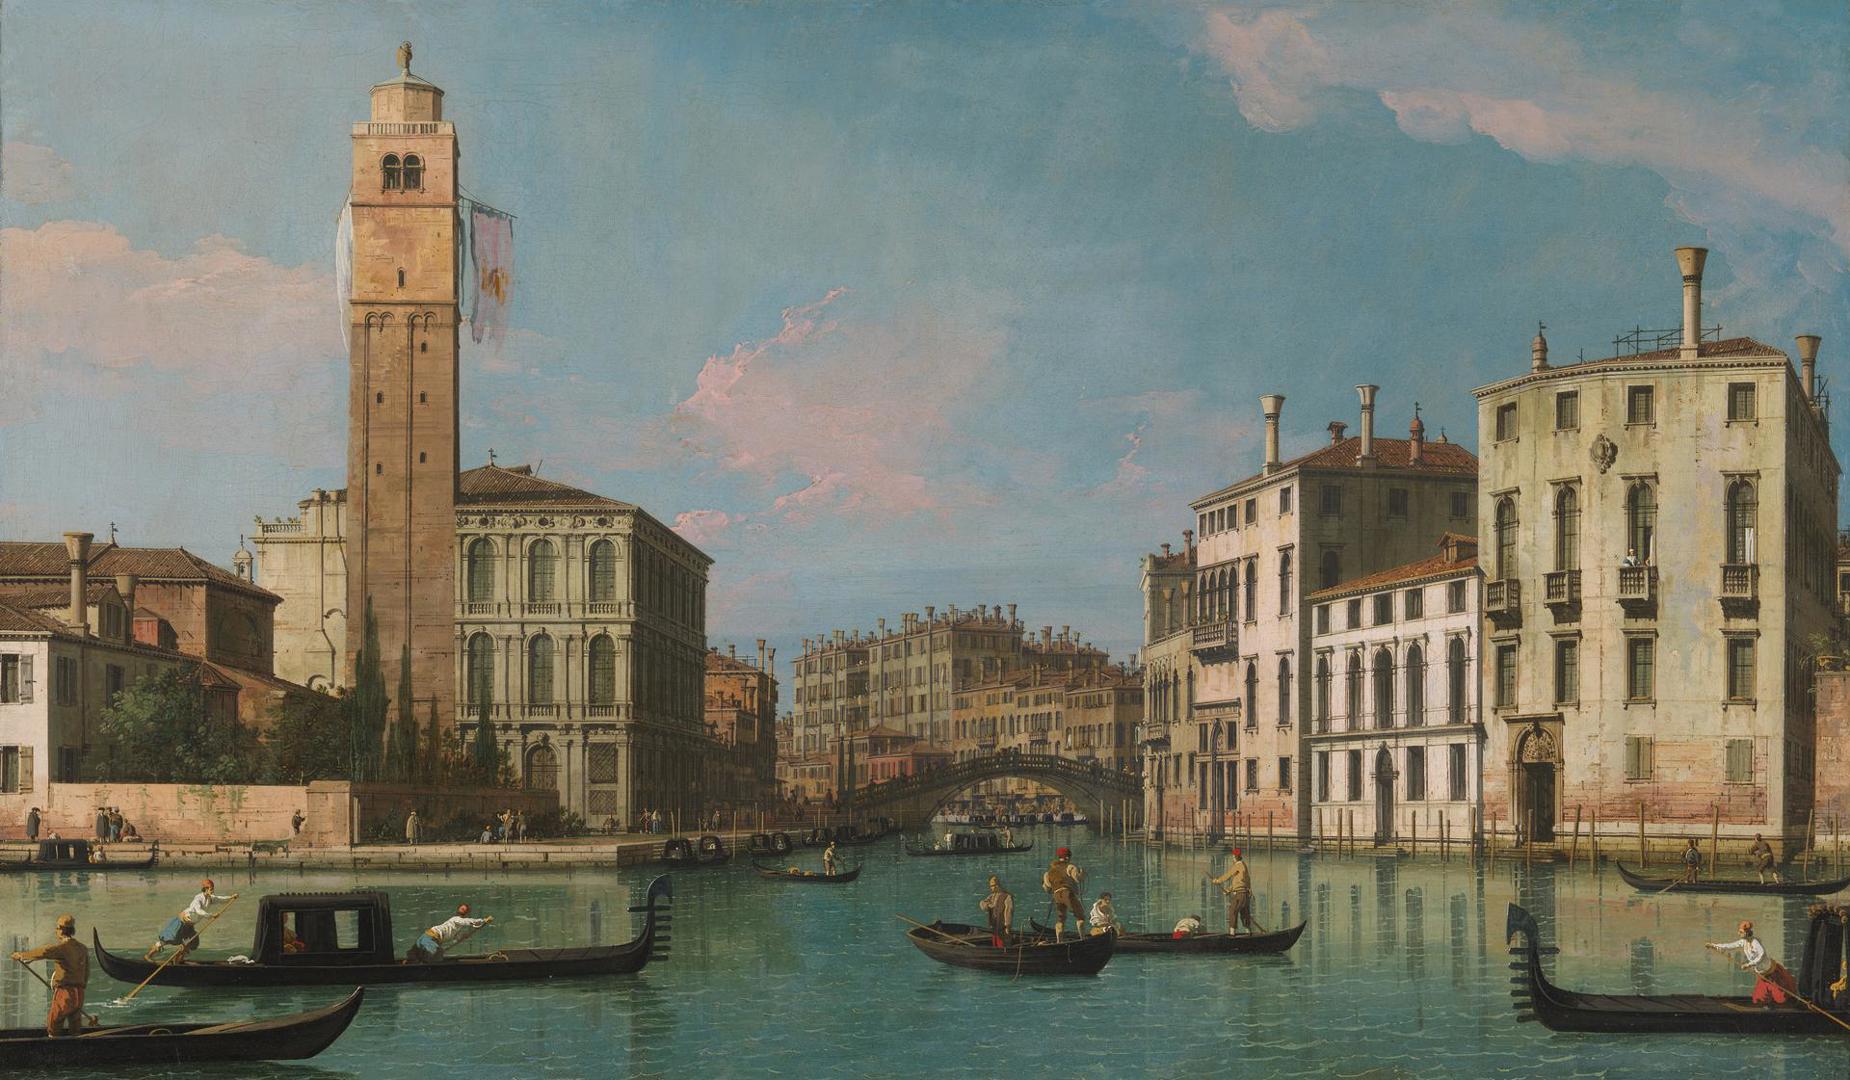 Venice: Entrance to the Cannaregio by Canaletto